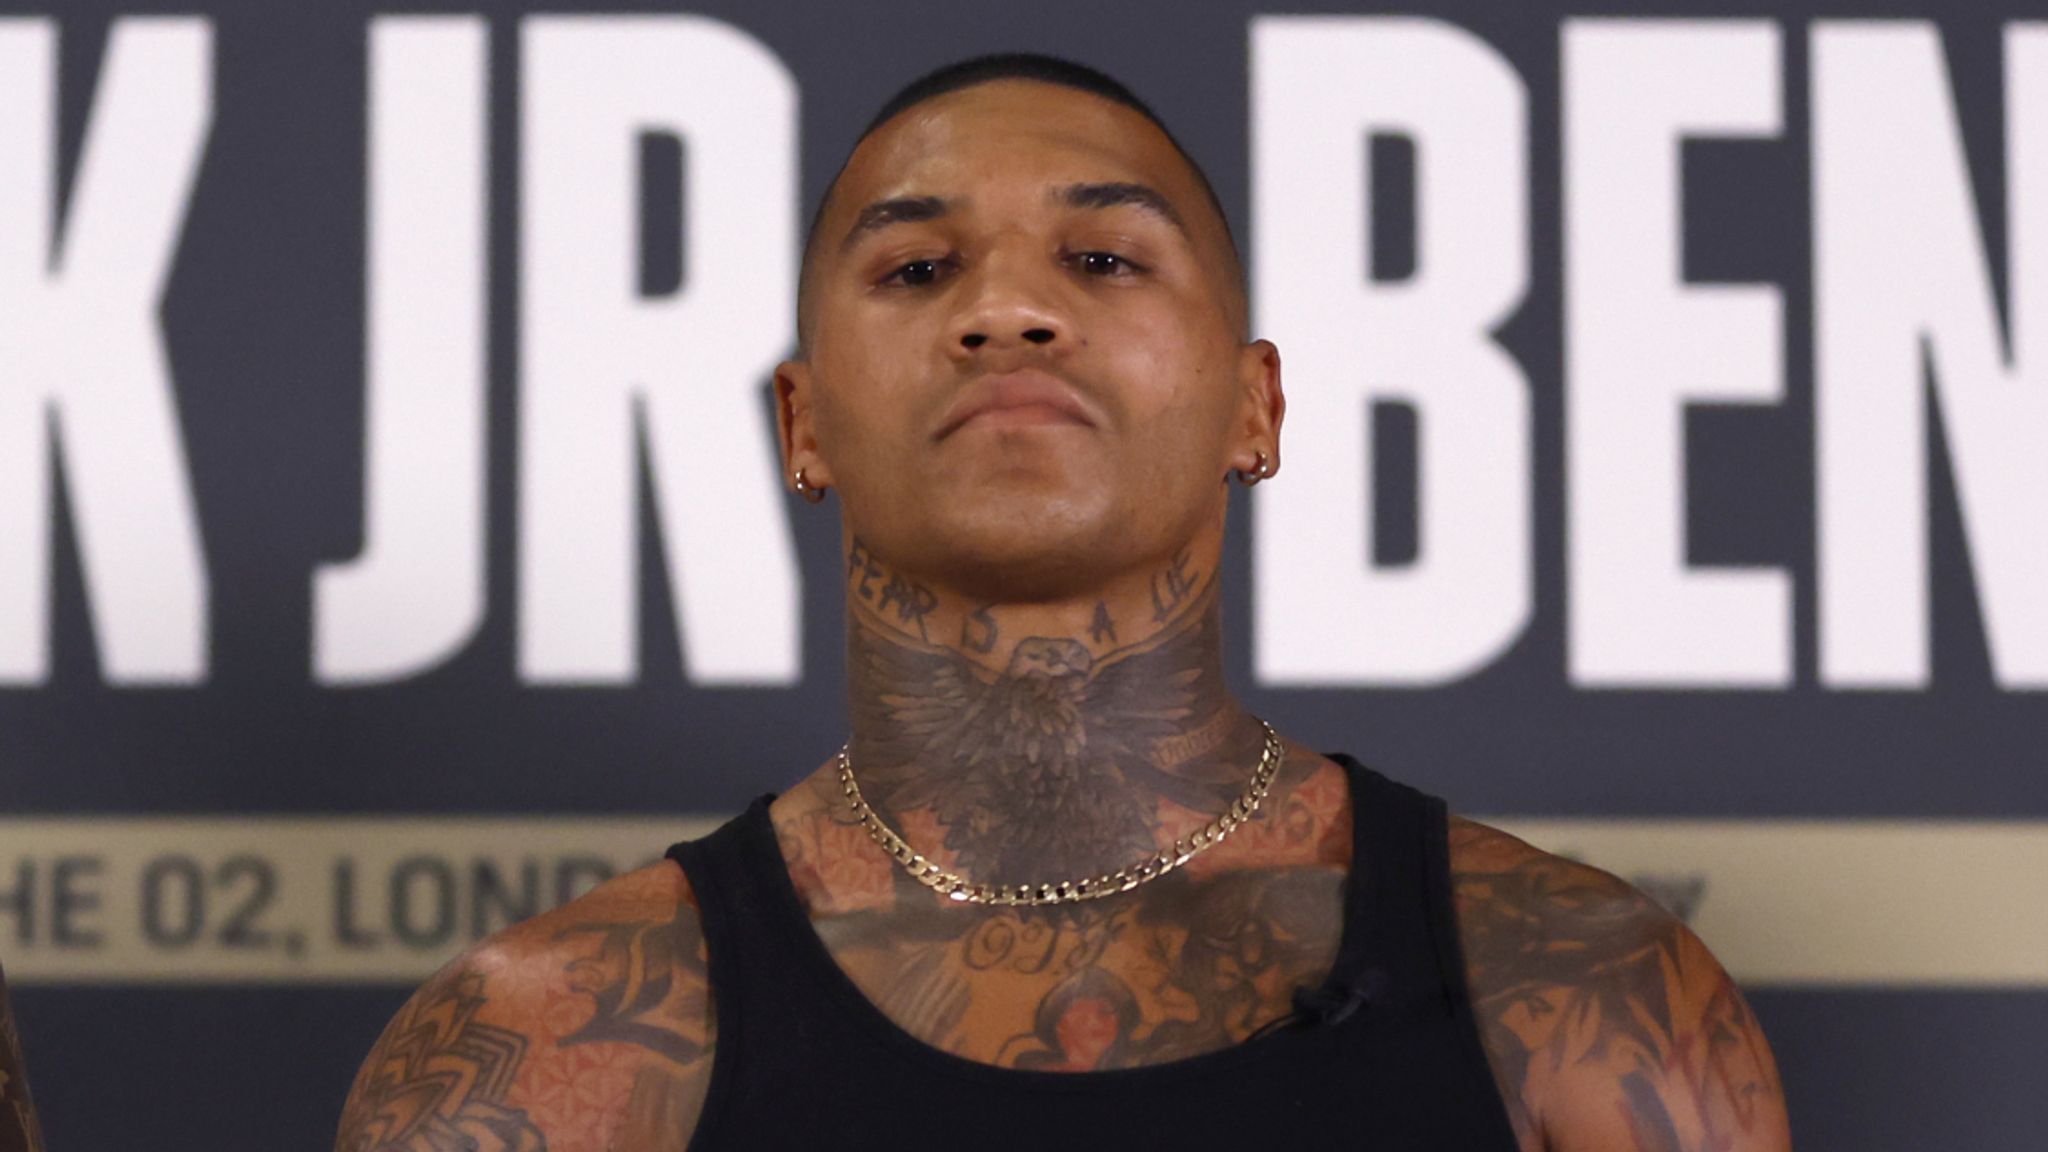 Conor Benn to return to WBC rankings as highly-elevated consumption of eggs explanation for failed drugs test Boxing News Sky Sports